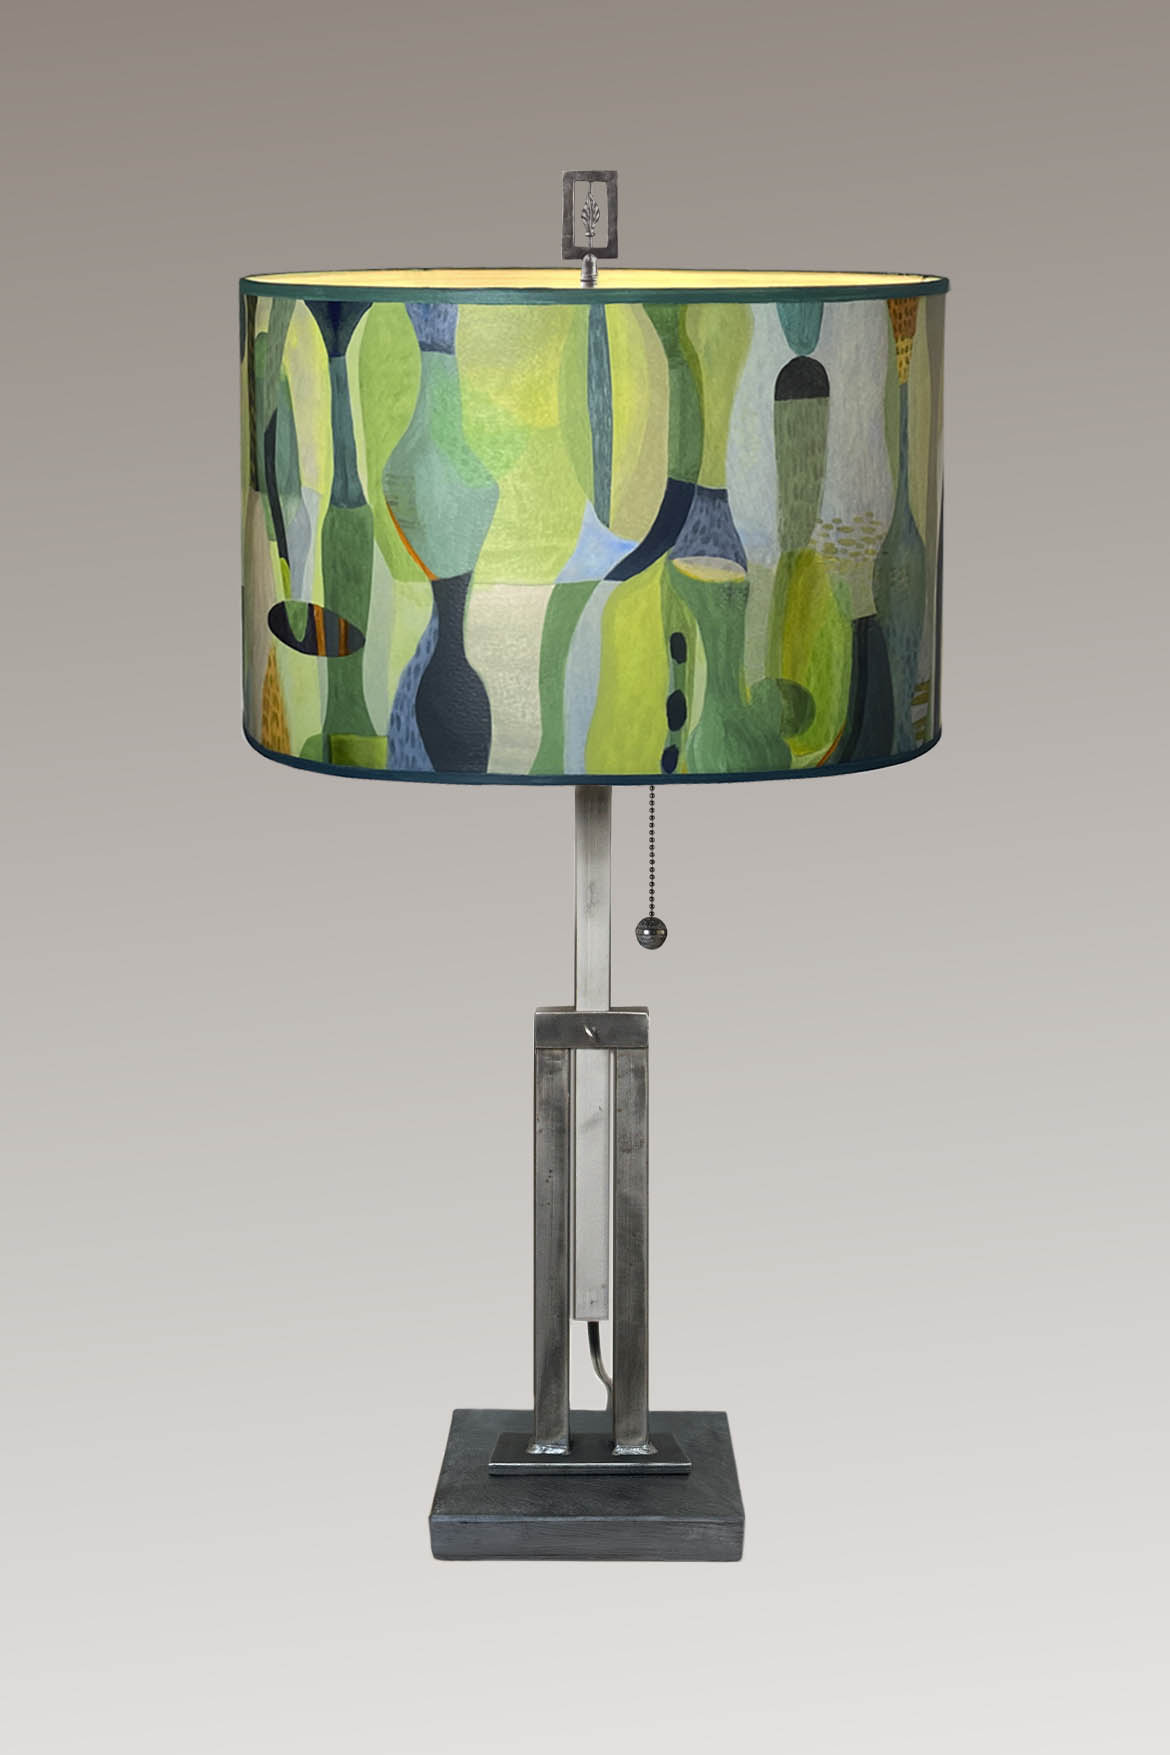 Janna Ugone &amp; Co Table Lamp Adjustable-Height Steel Table Lamp with Large Drum Shade in Riviera in Citrus